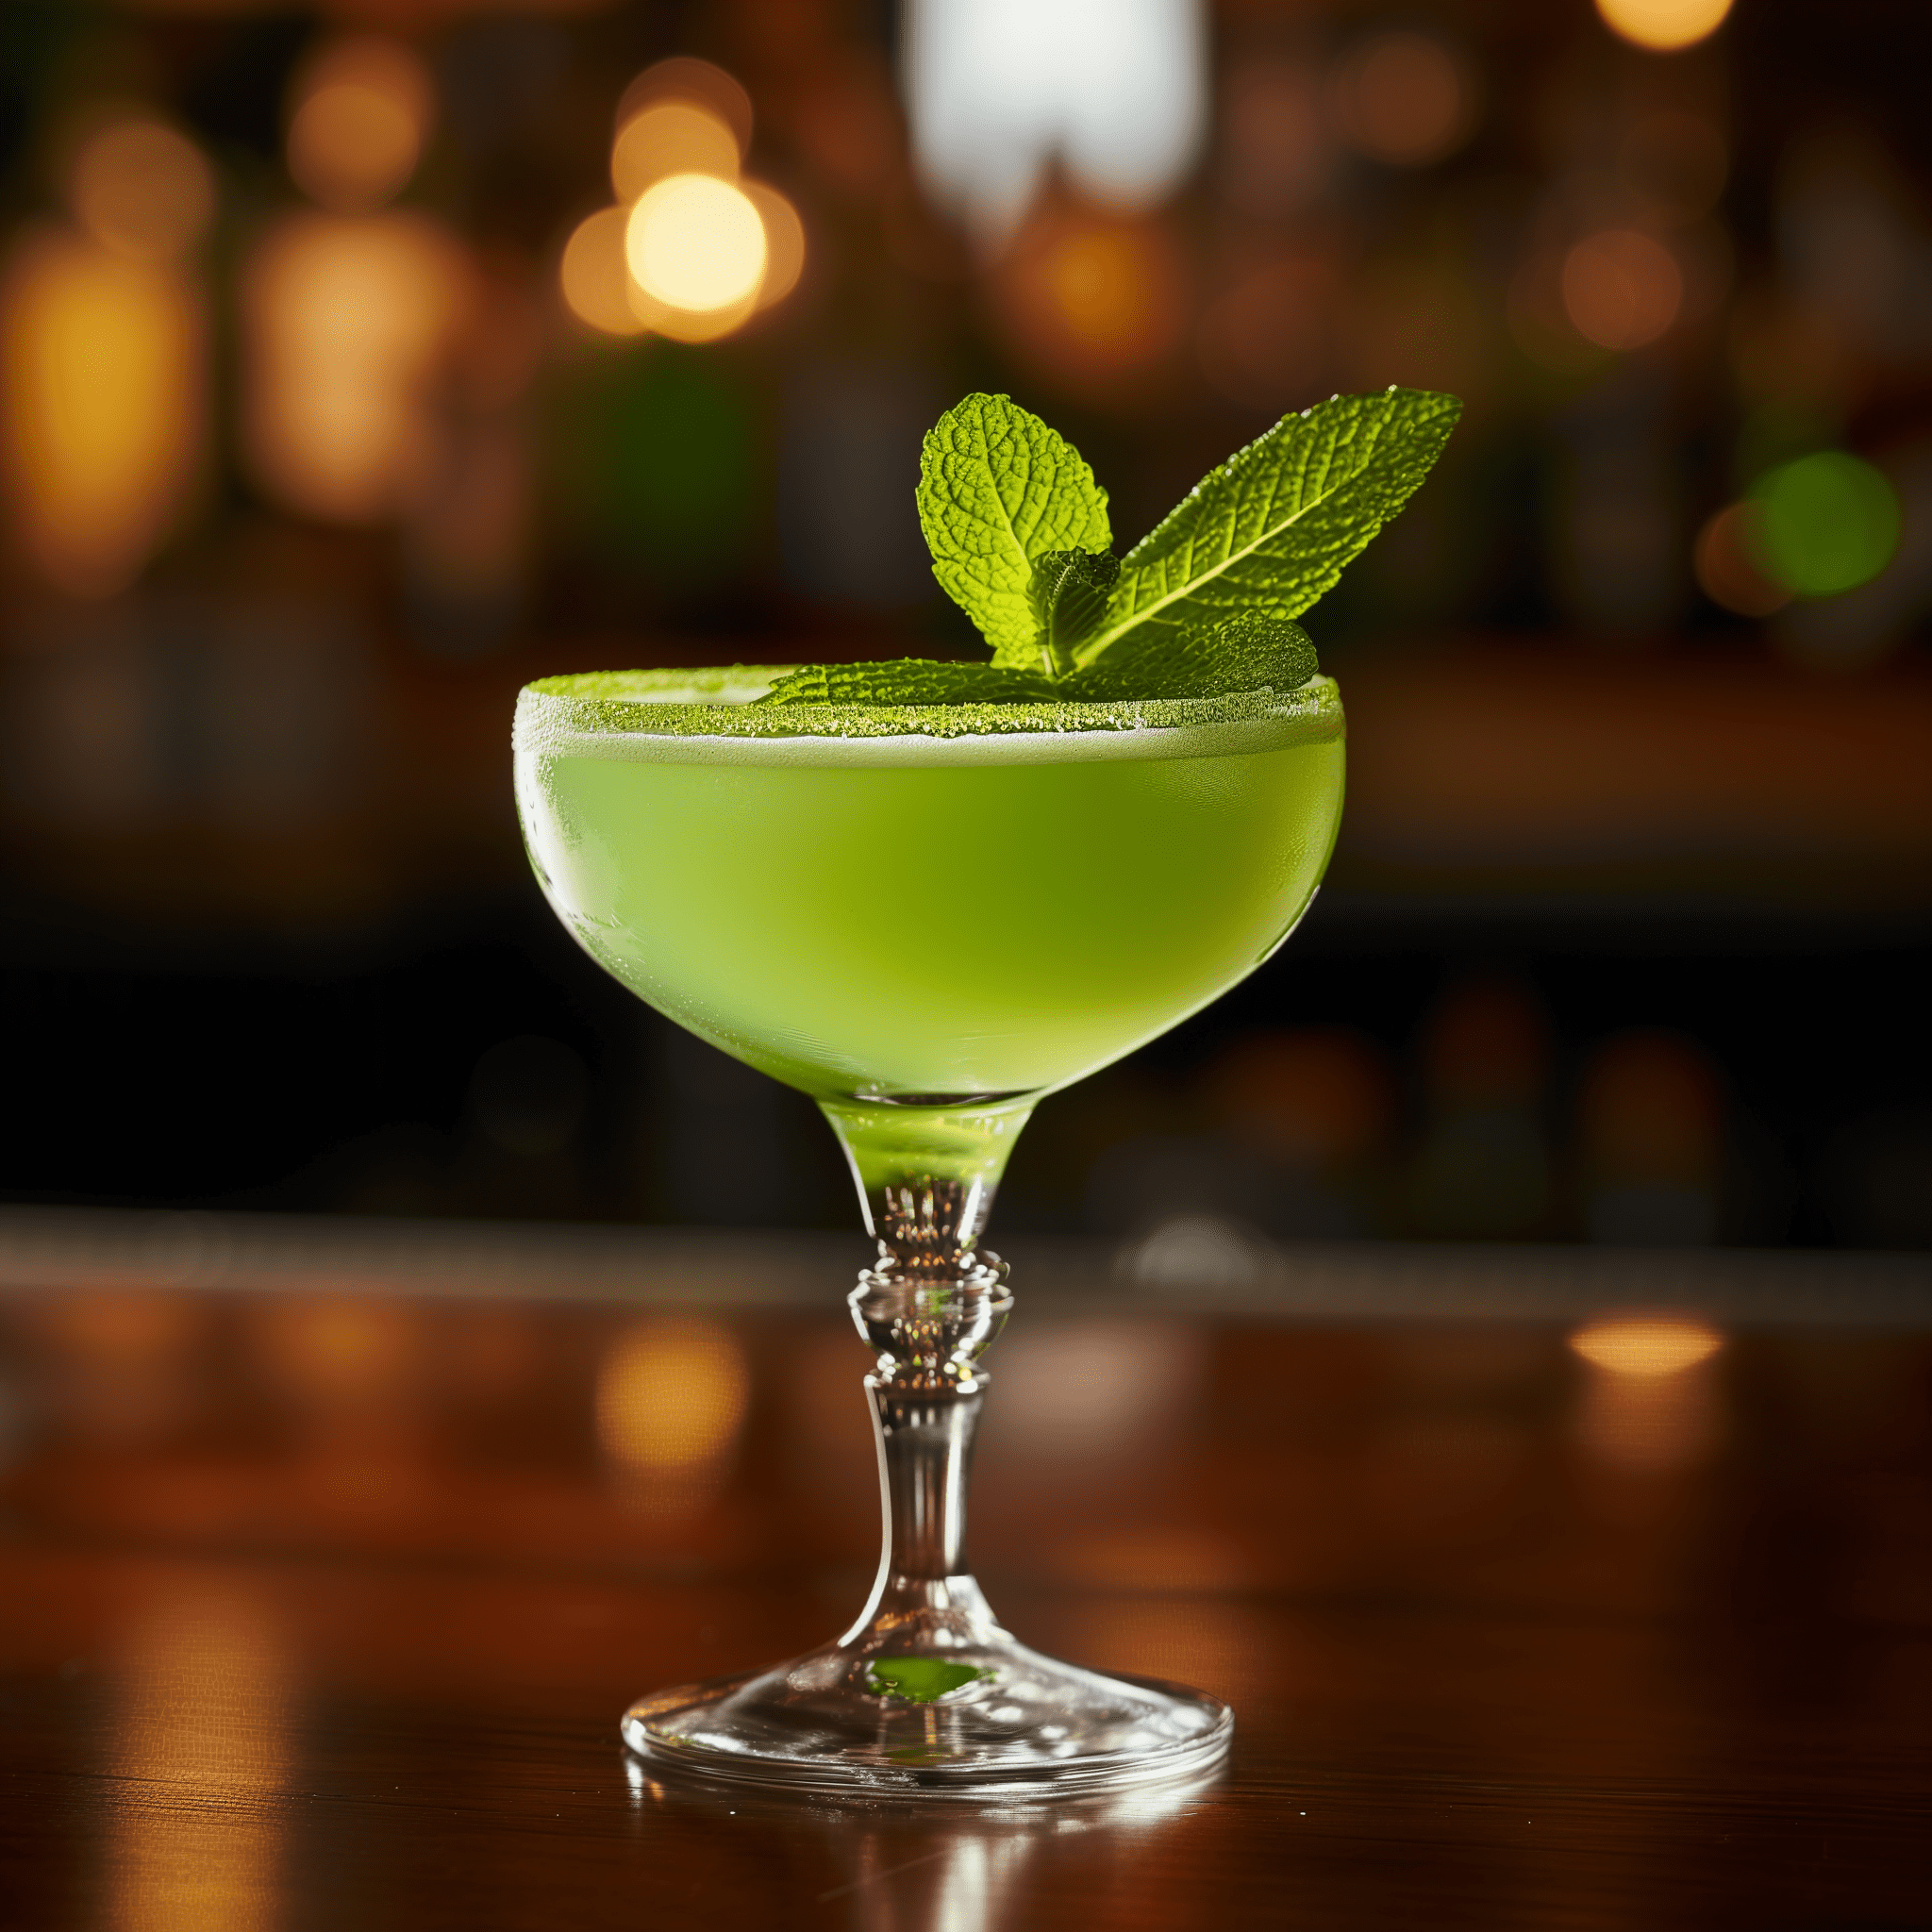 Blarney Stone Cocktail Recipe - The Blarney Stone cocktail offers a complex flavor profile. It's herbal and slightly sweet from the green Chartreuse and mint liqueur, with a robust and smooth whiskey backbone. The overall taste is balanced, with a warming finish.